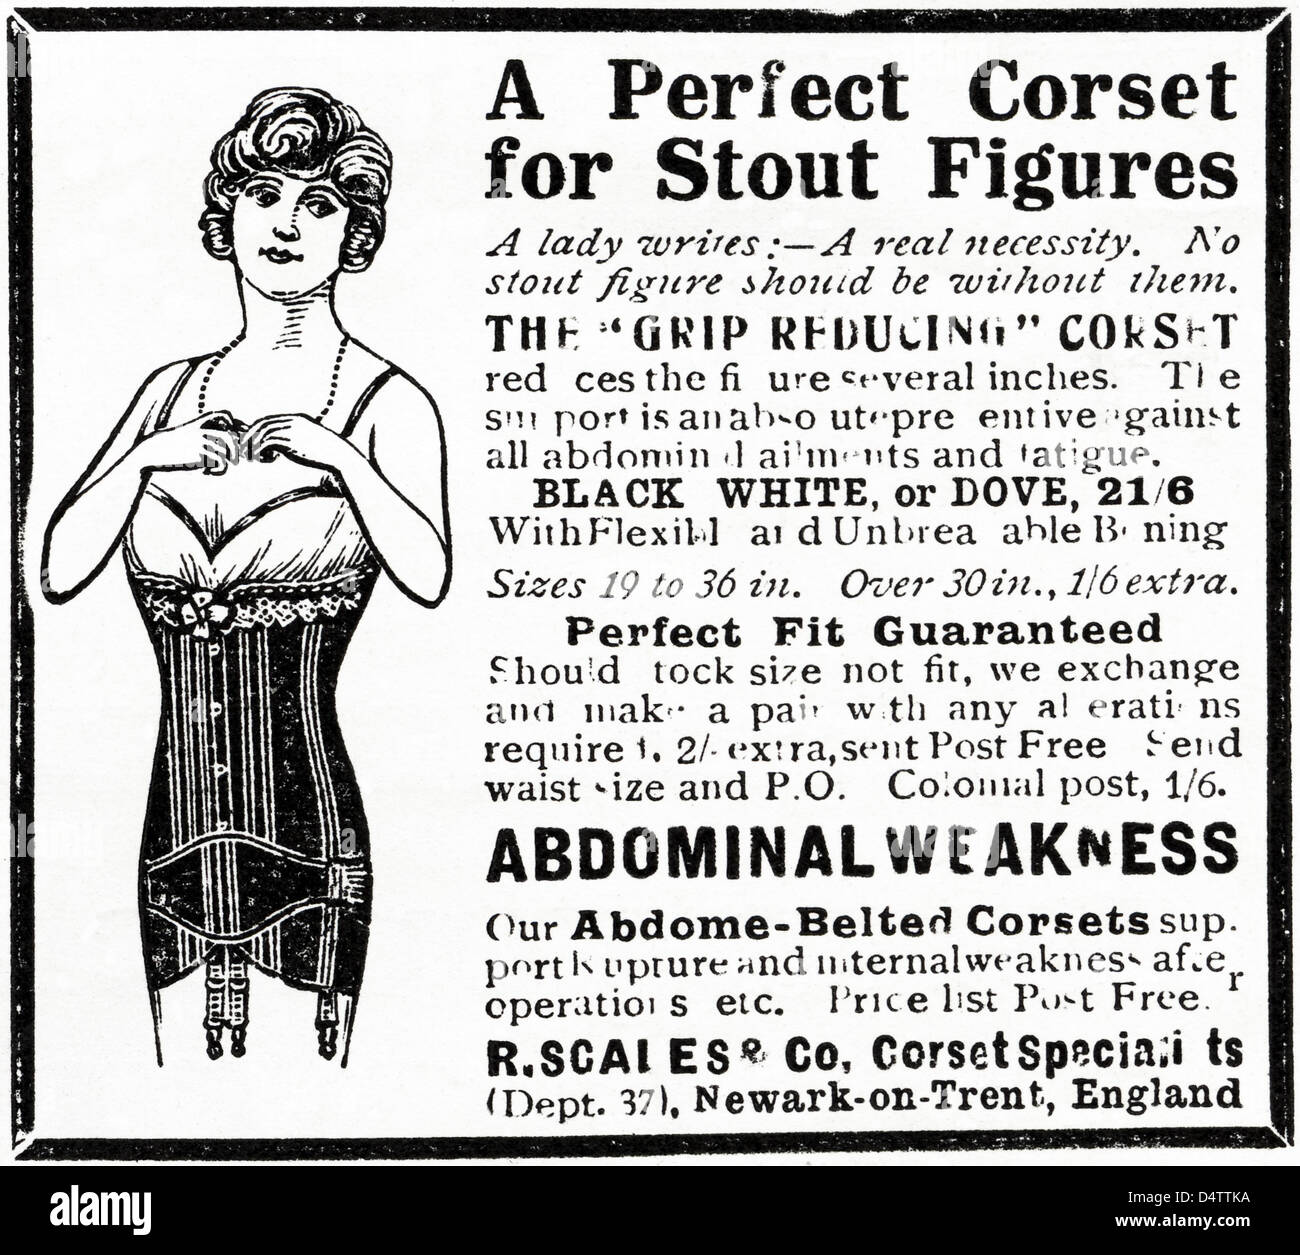 Original 1920s period vintage advertisement print from English magazine  advertising A PERFECT CORSET FOR STOUT FIGURES Stock Photo - Alamy